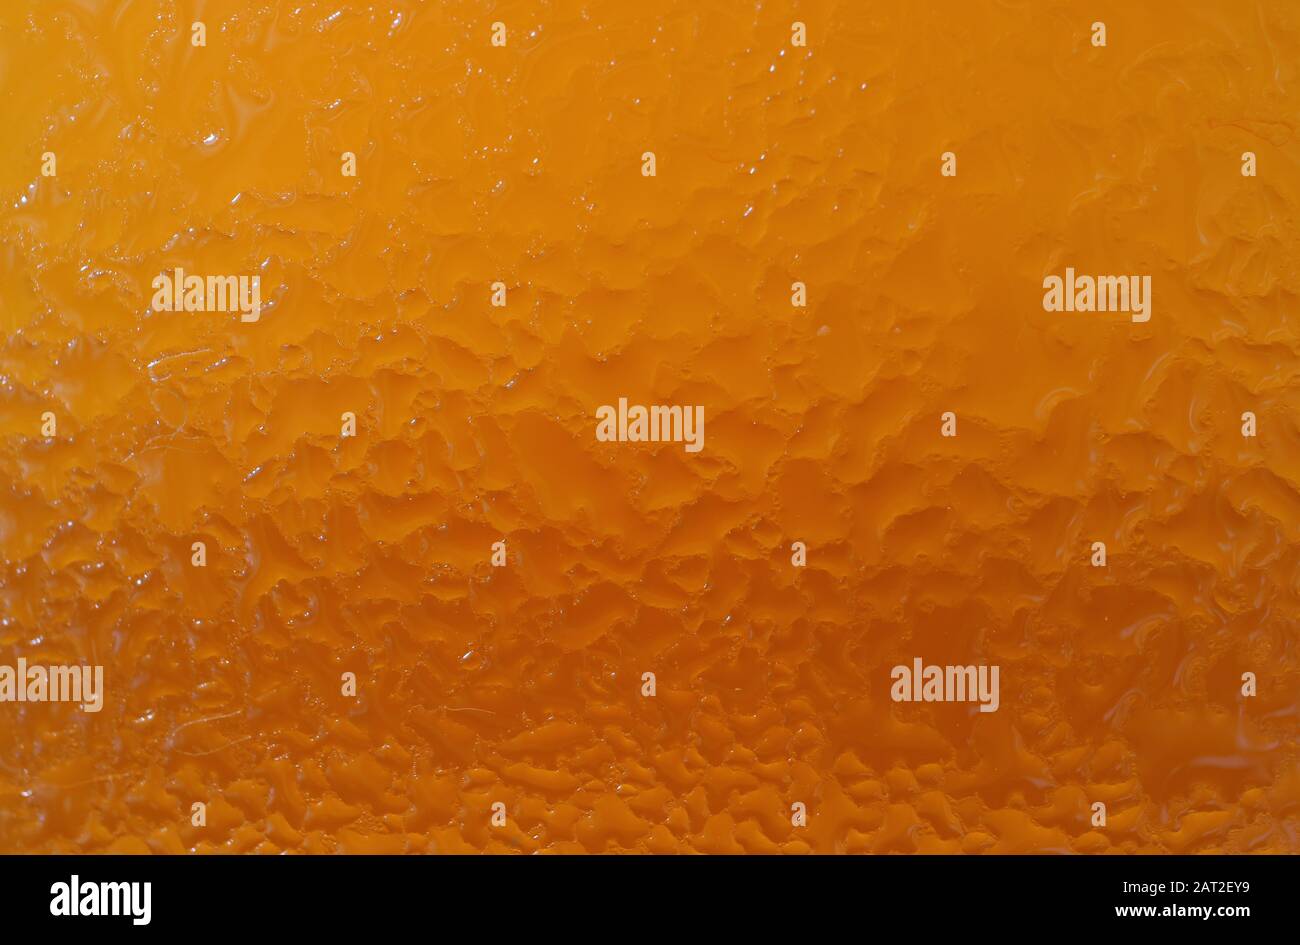 Download Condensation On The Glass Of Amber Color Cold Weizen Beer Stock Photo Alamy Yellowimages Mockups